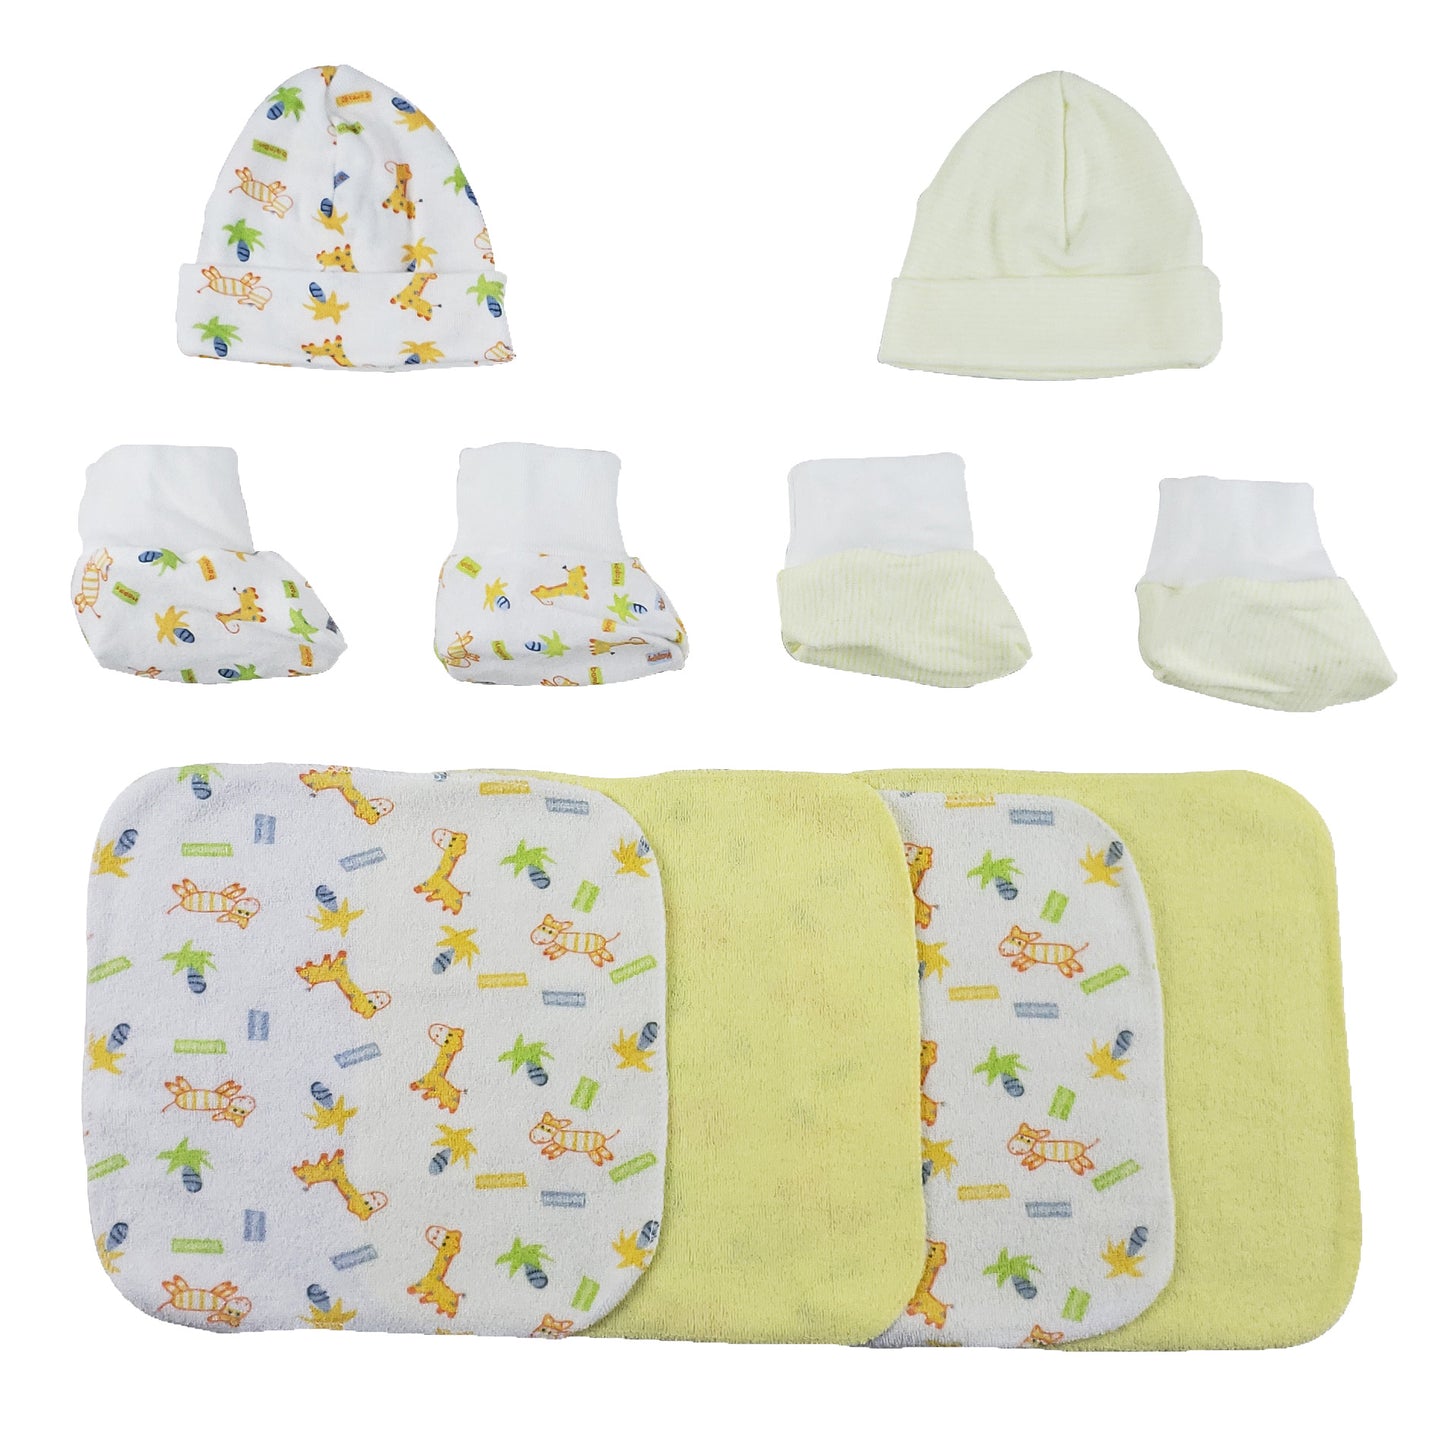 Two Rib Knit Infant Caps and Booties Sets and Four Washcloths - 8 pc Set CS_0016